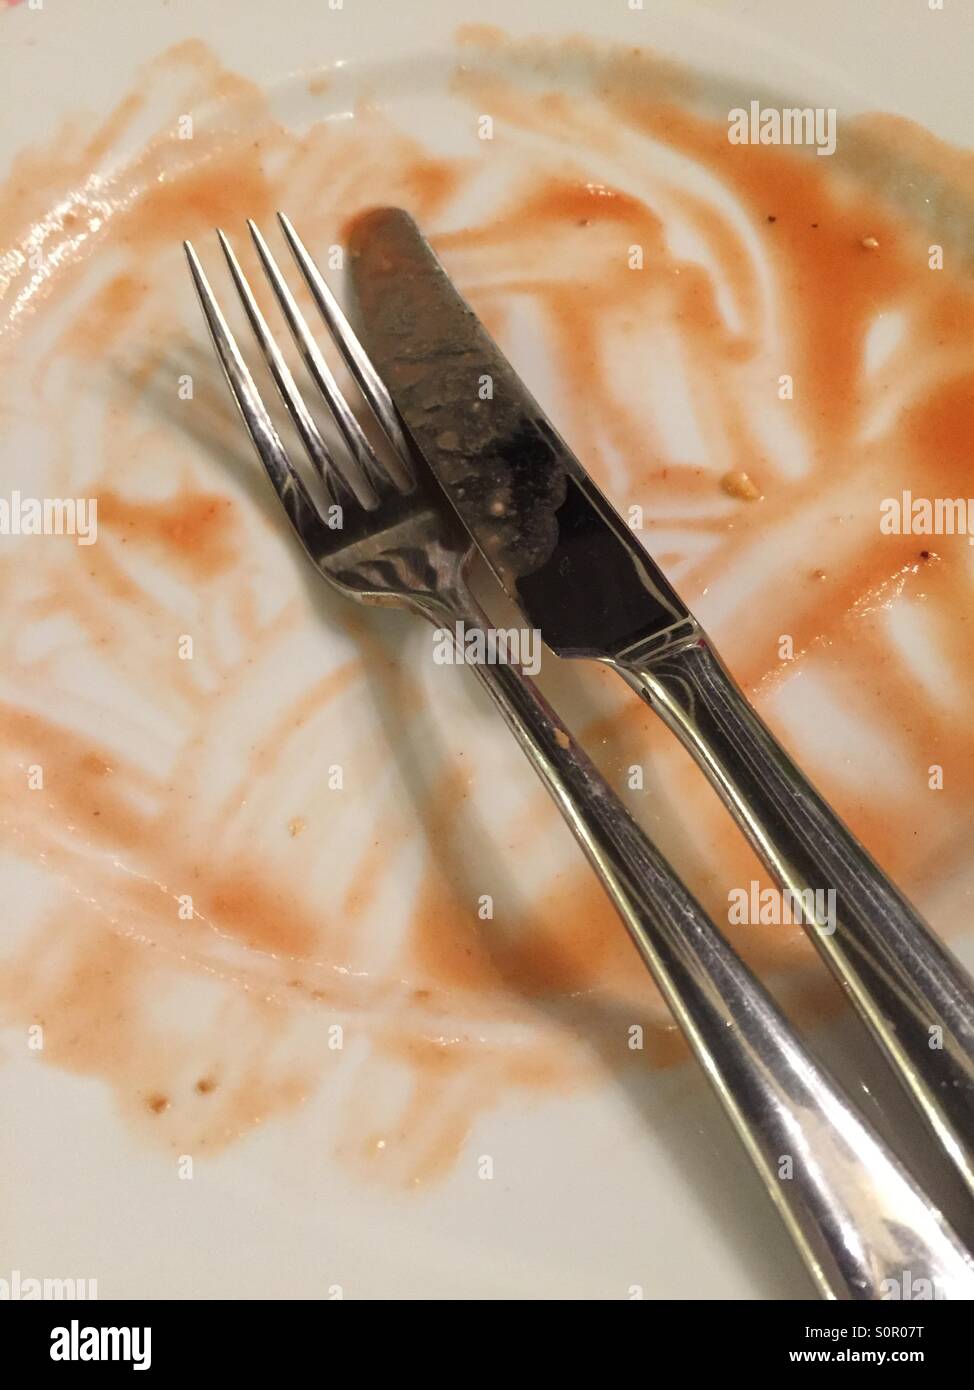 Clean plate Stock Photo